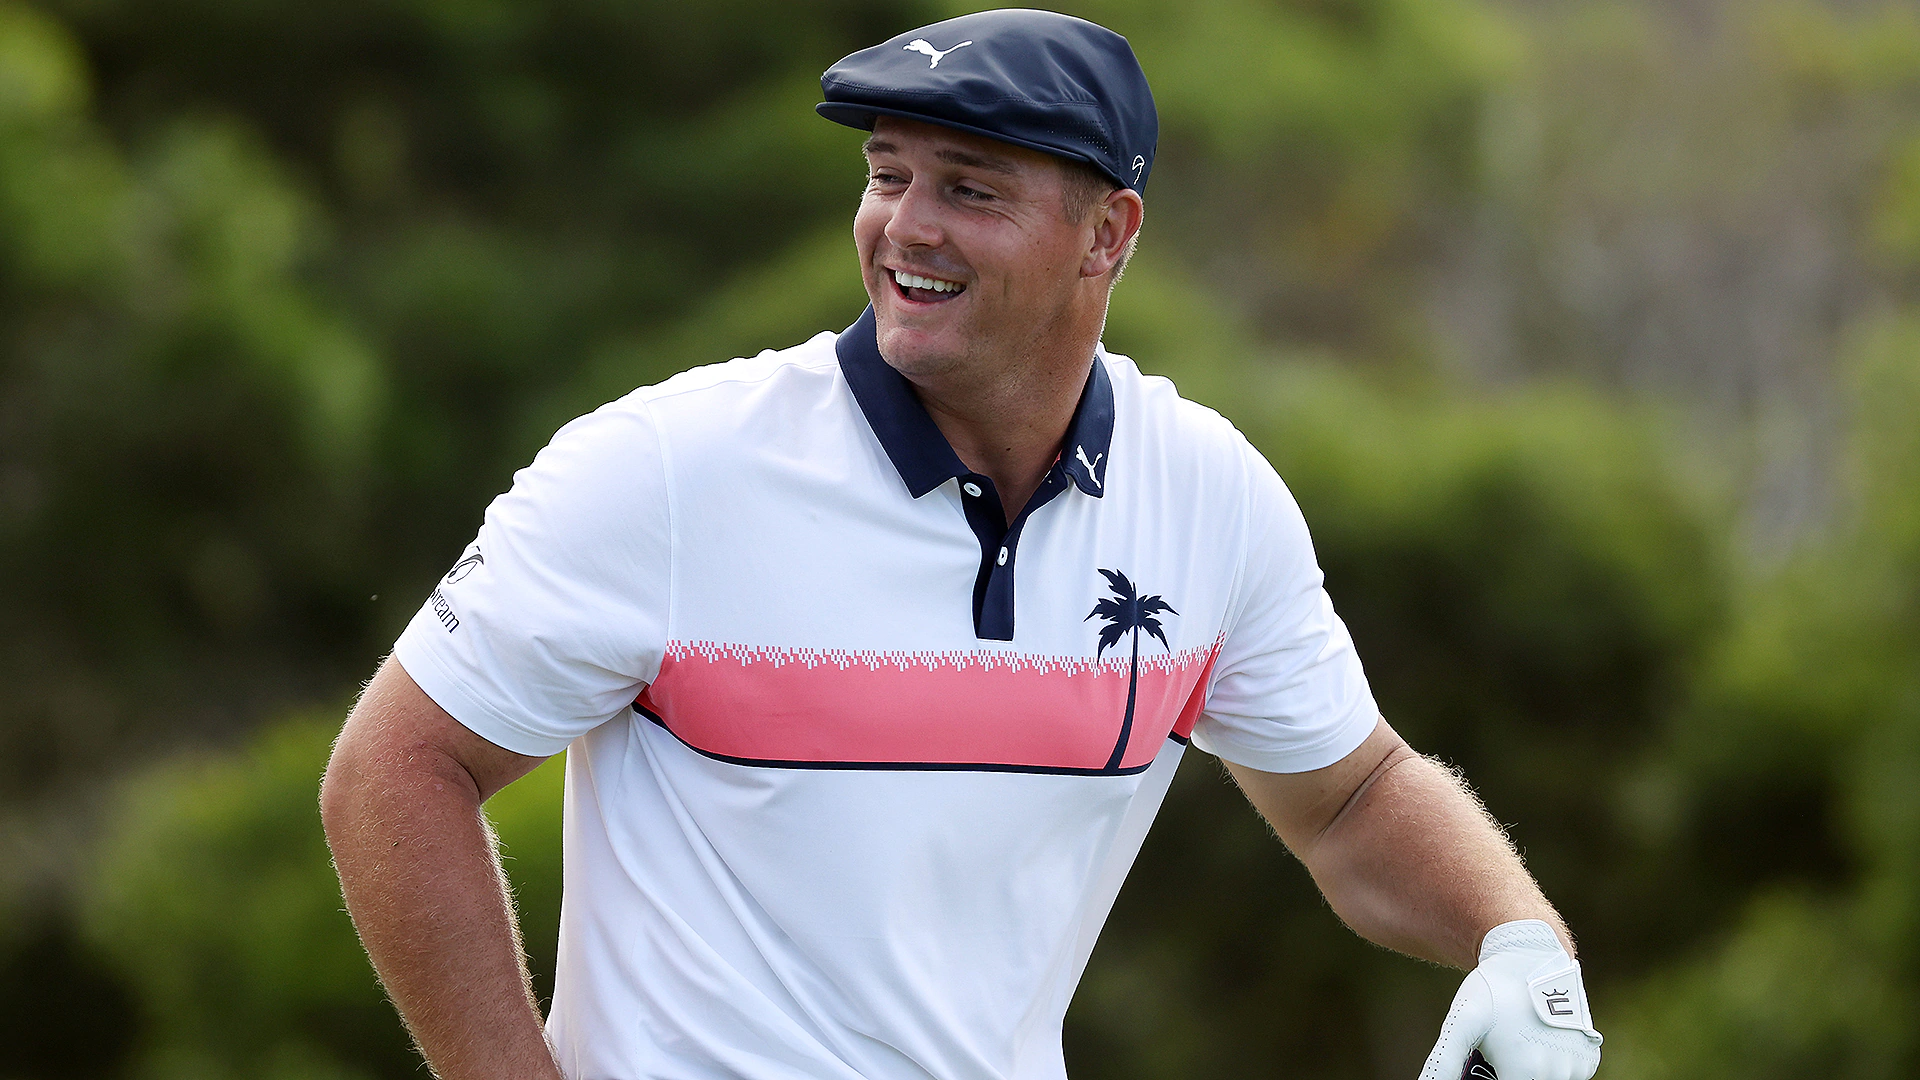 Bryson DeChambeau worked so hard chasing speed that he nearly blacked out